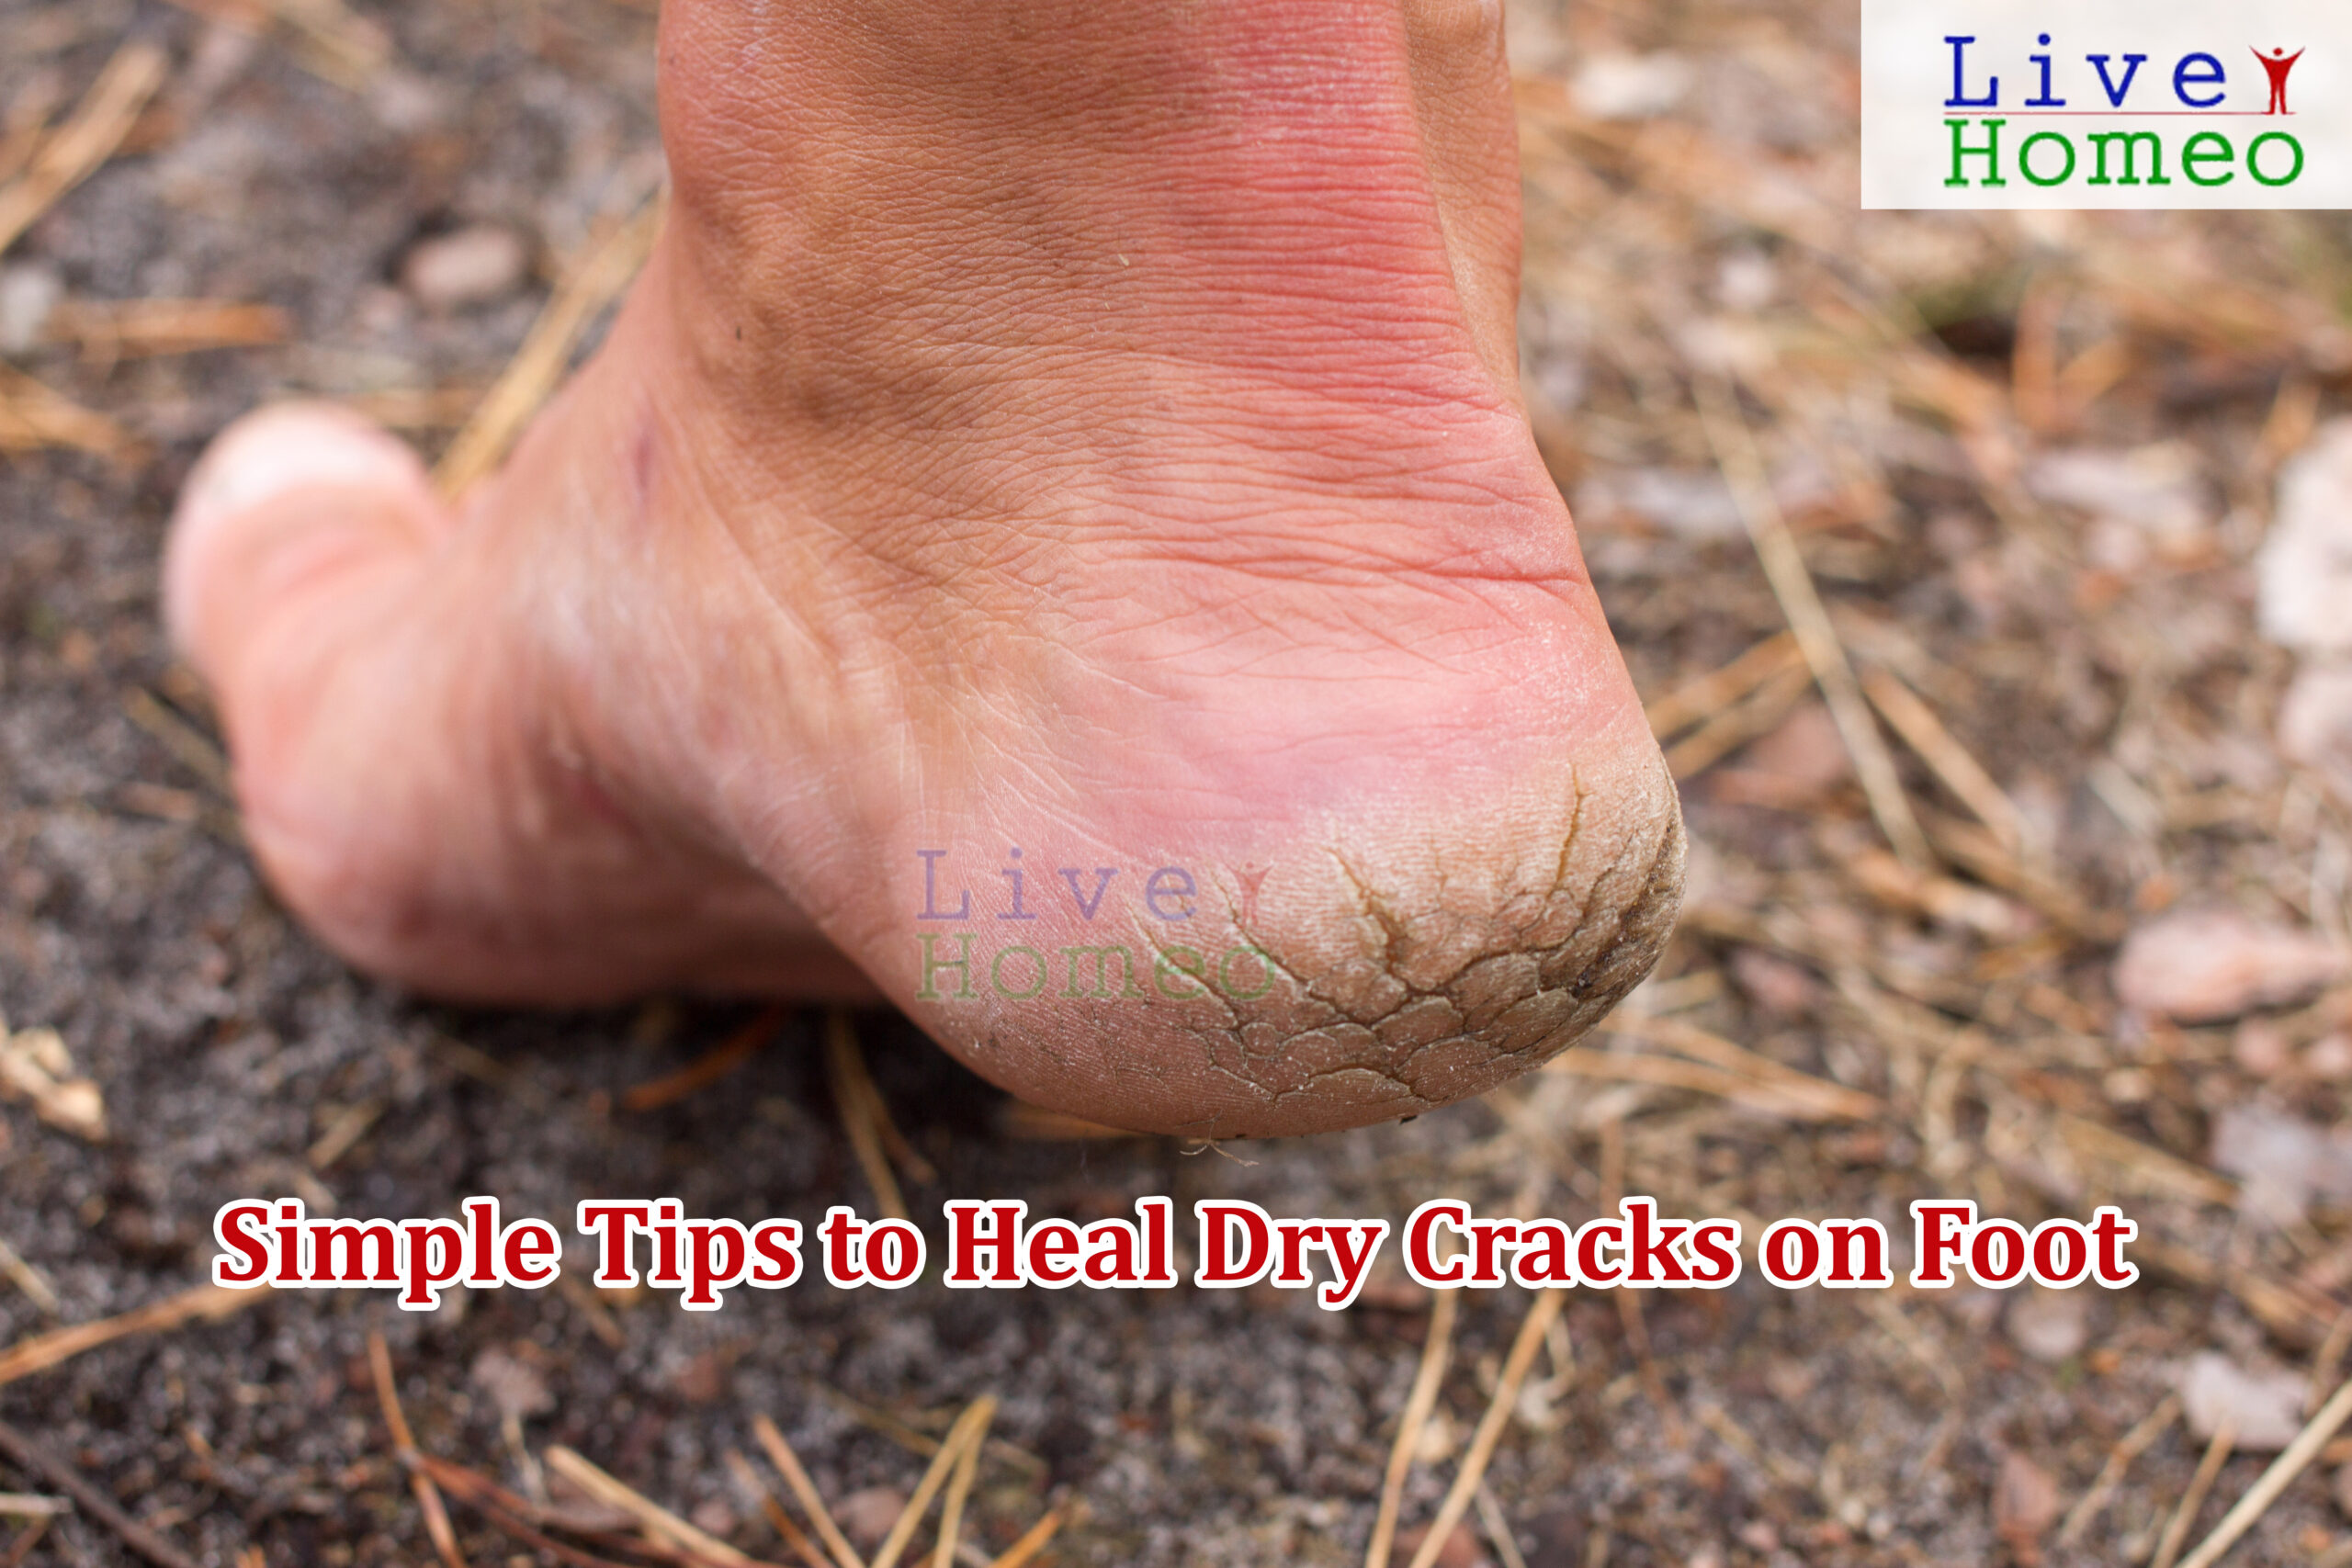 Simple Tips to Heal Dry Cracks on Foot